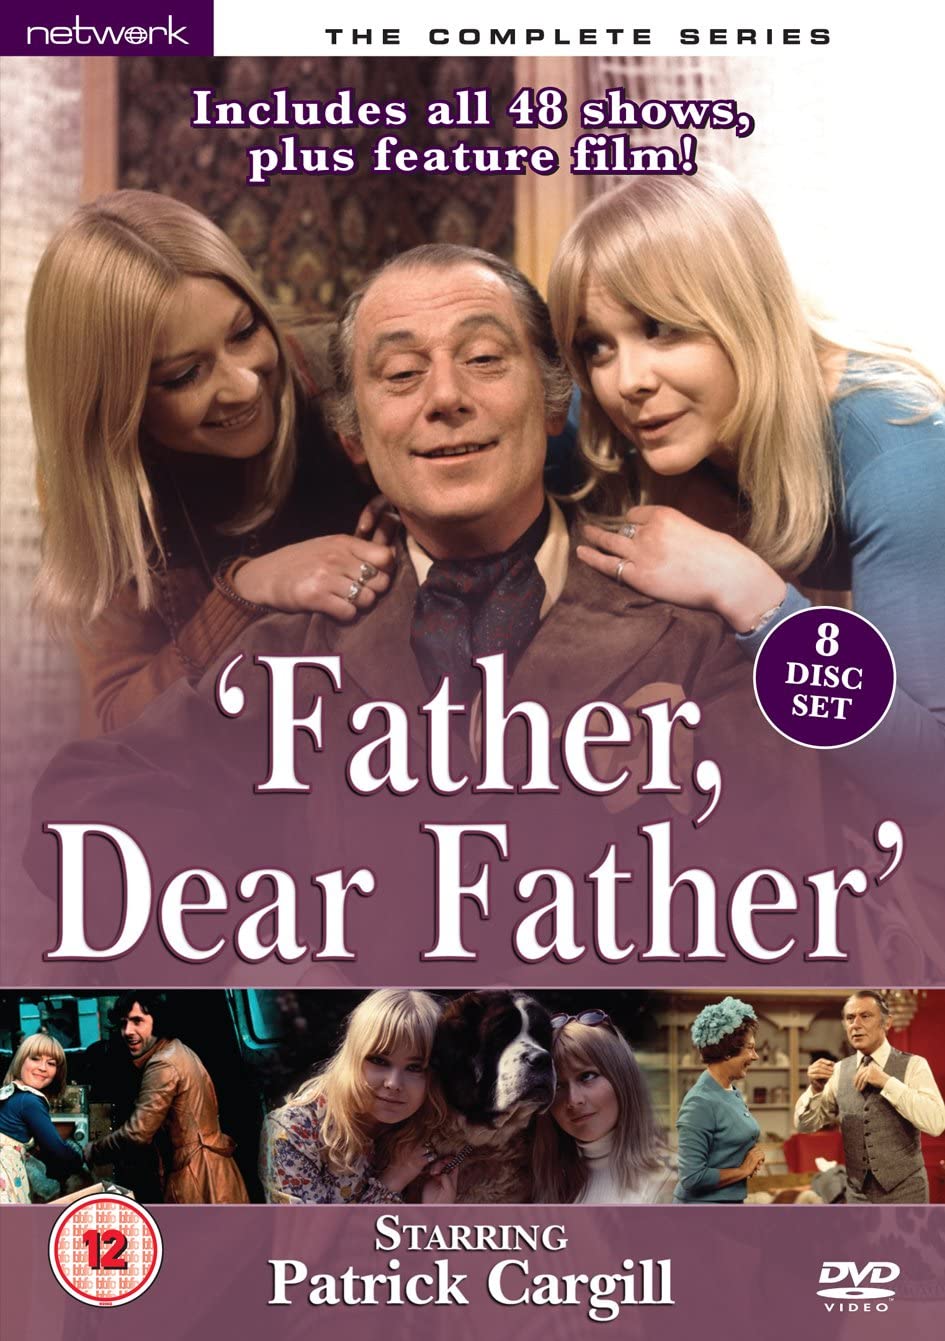 Father Dear Father - The Complete Series [DVD]